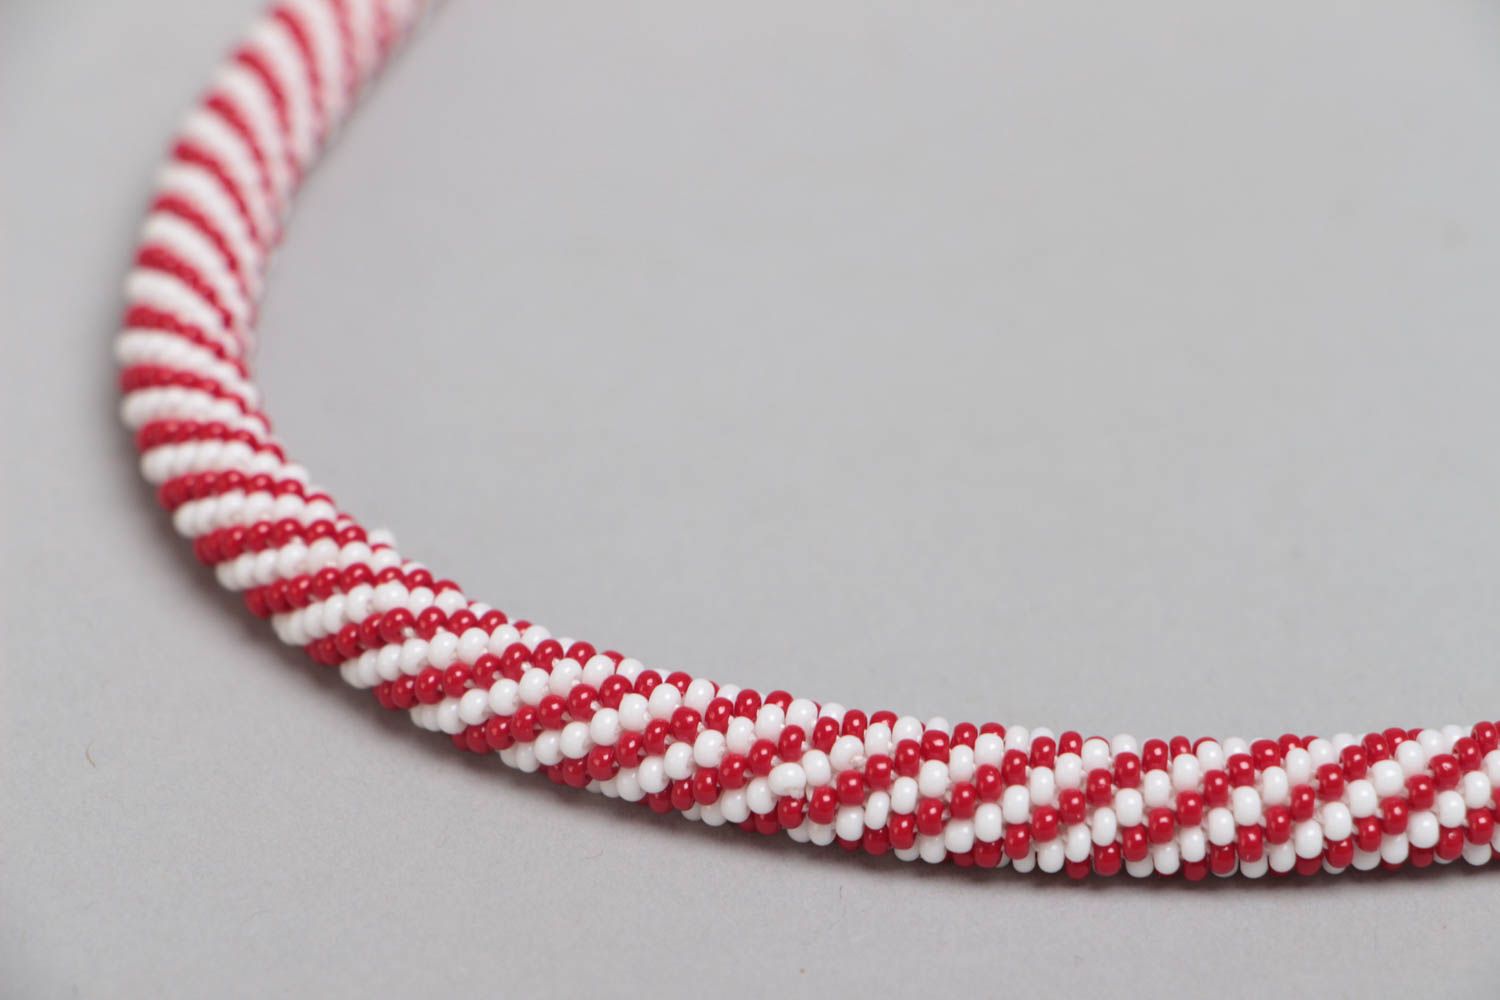 Handmade stylish long red and white beaded cord necklace for women photo 3